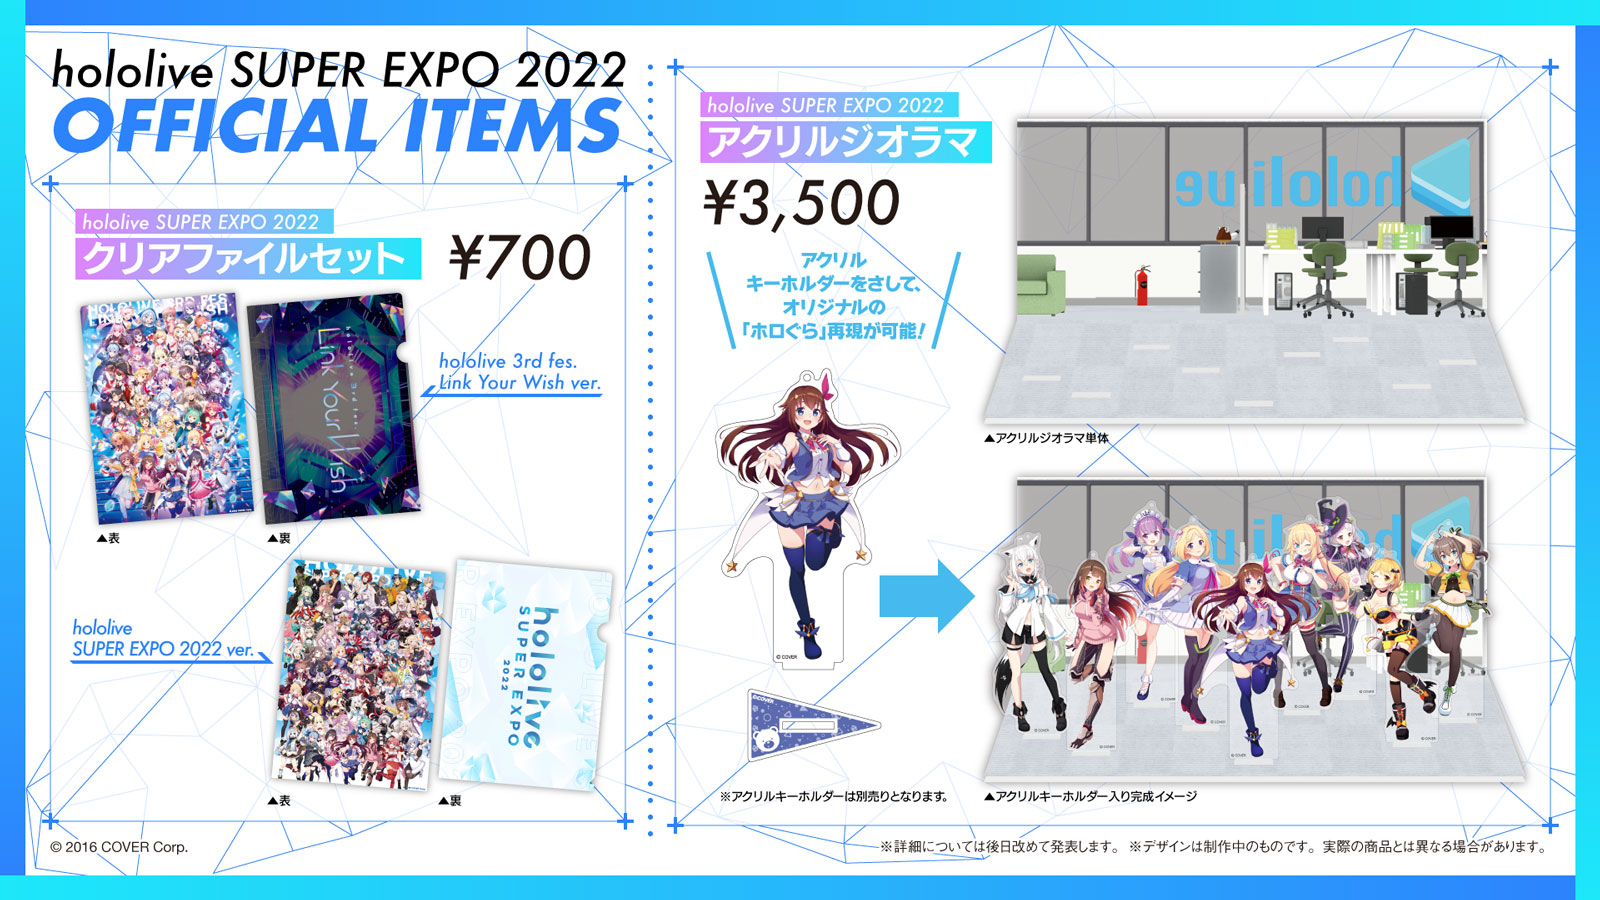 hololive SUPER EXPO 2022 パンフレット 未開封